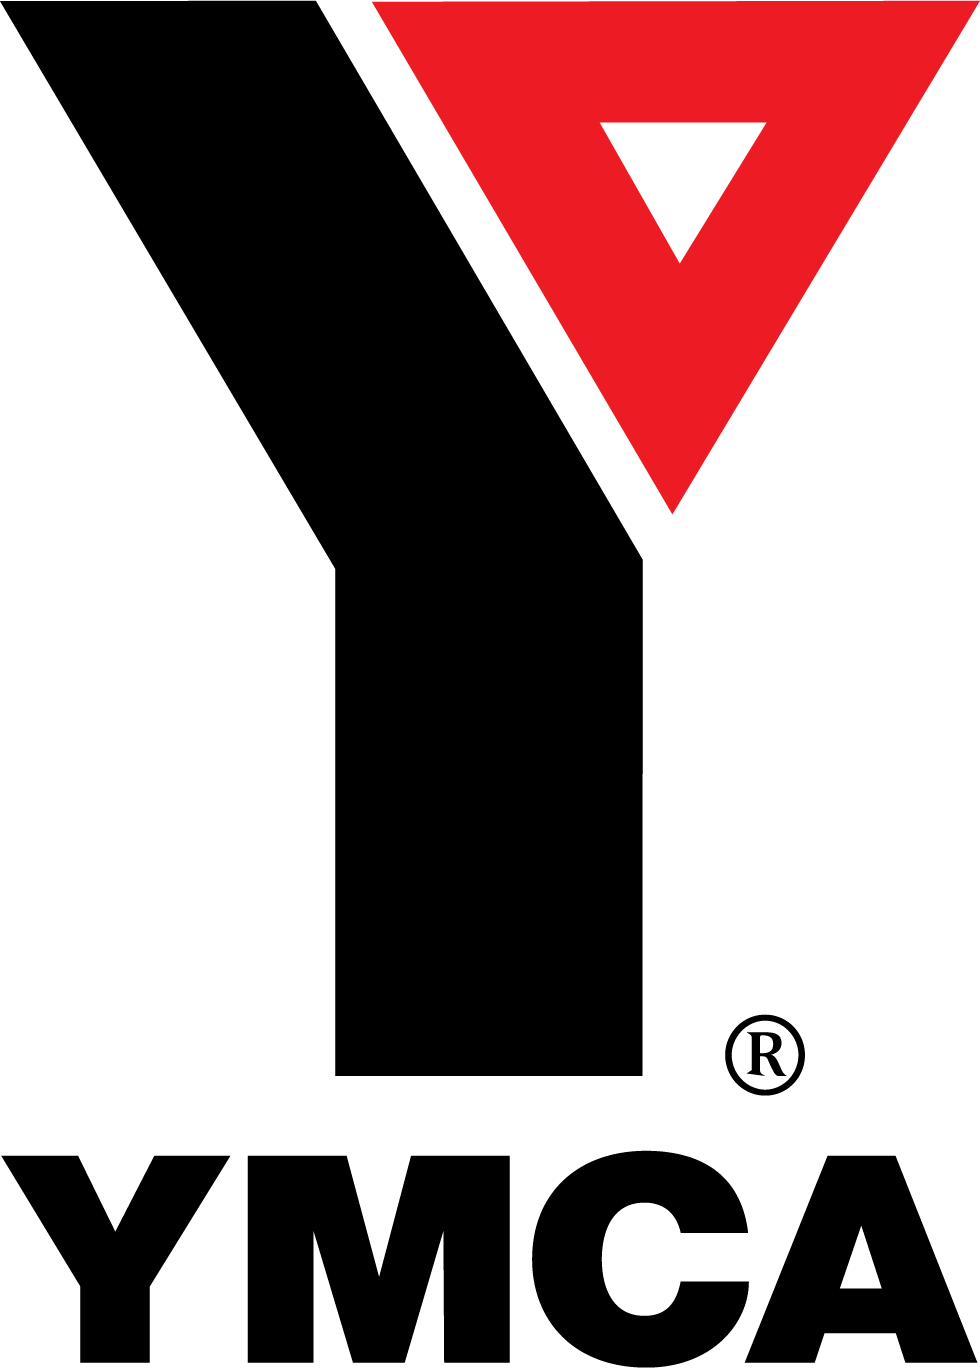 New YMCA Logo - YMCA National - Welcome to the YMCA